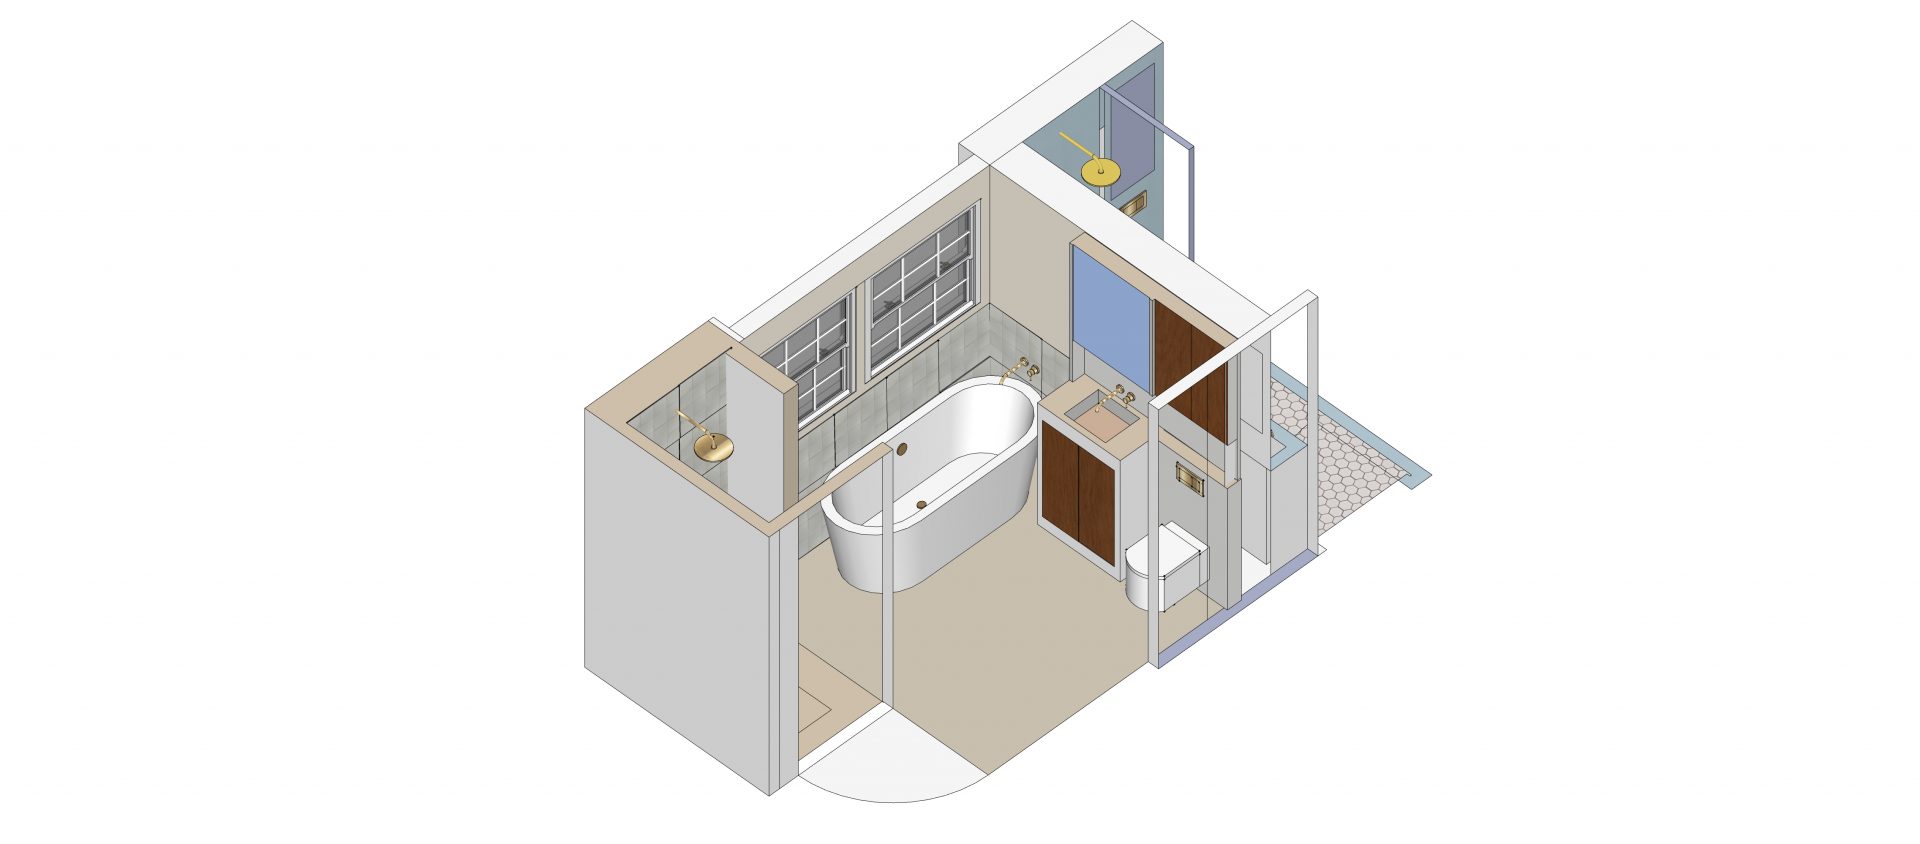 image showing a 3d model of a bathroom design in worthing